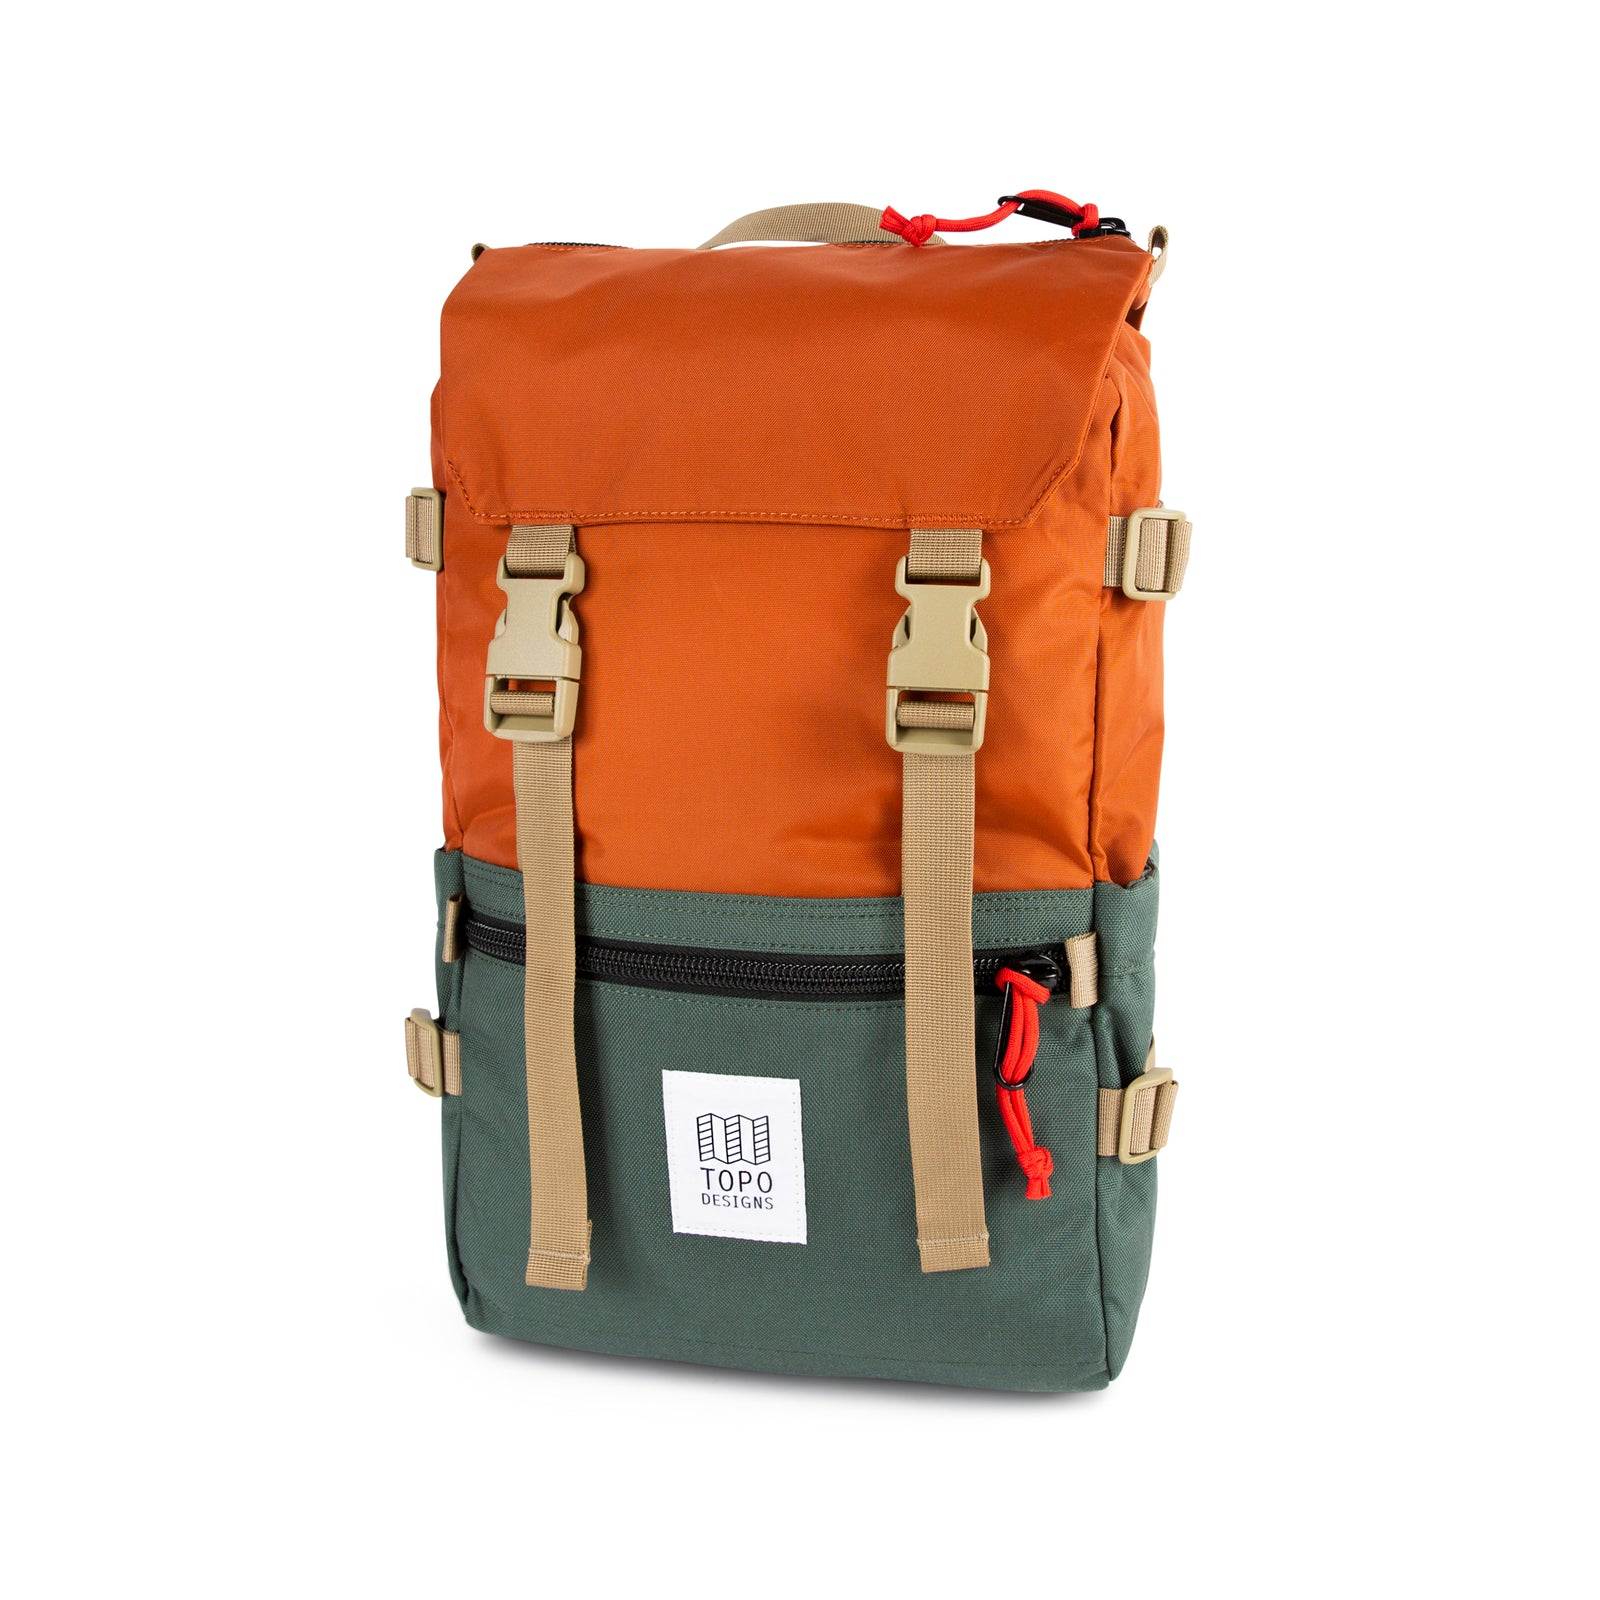 Topo Designs Rover Pack Classic laptop backpack in "Clay / Forest".